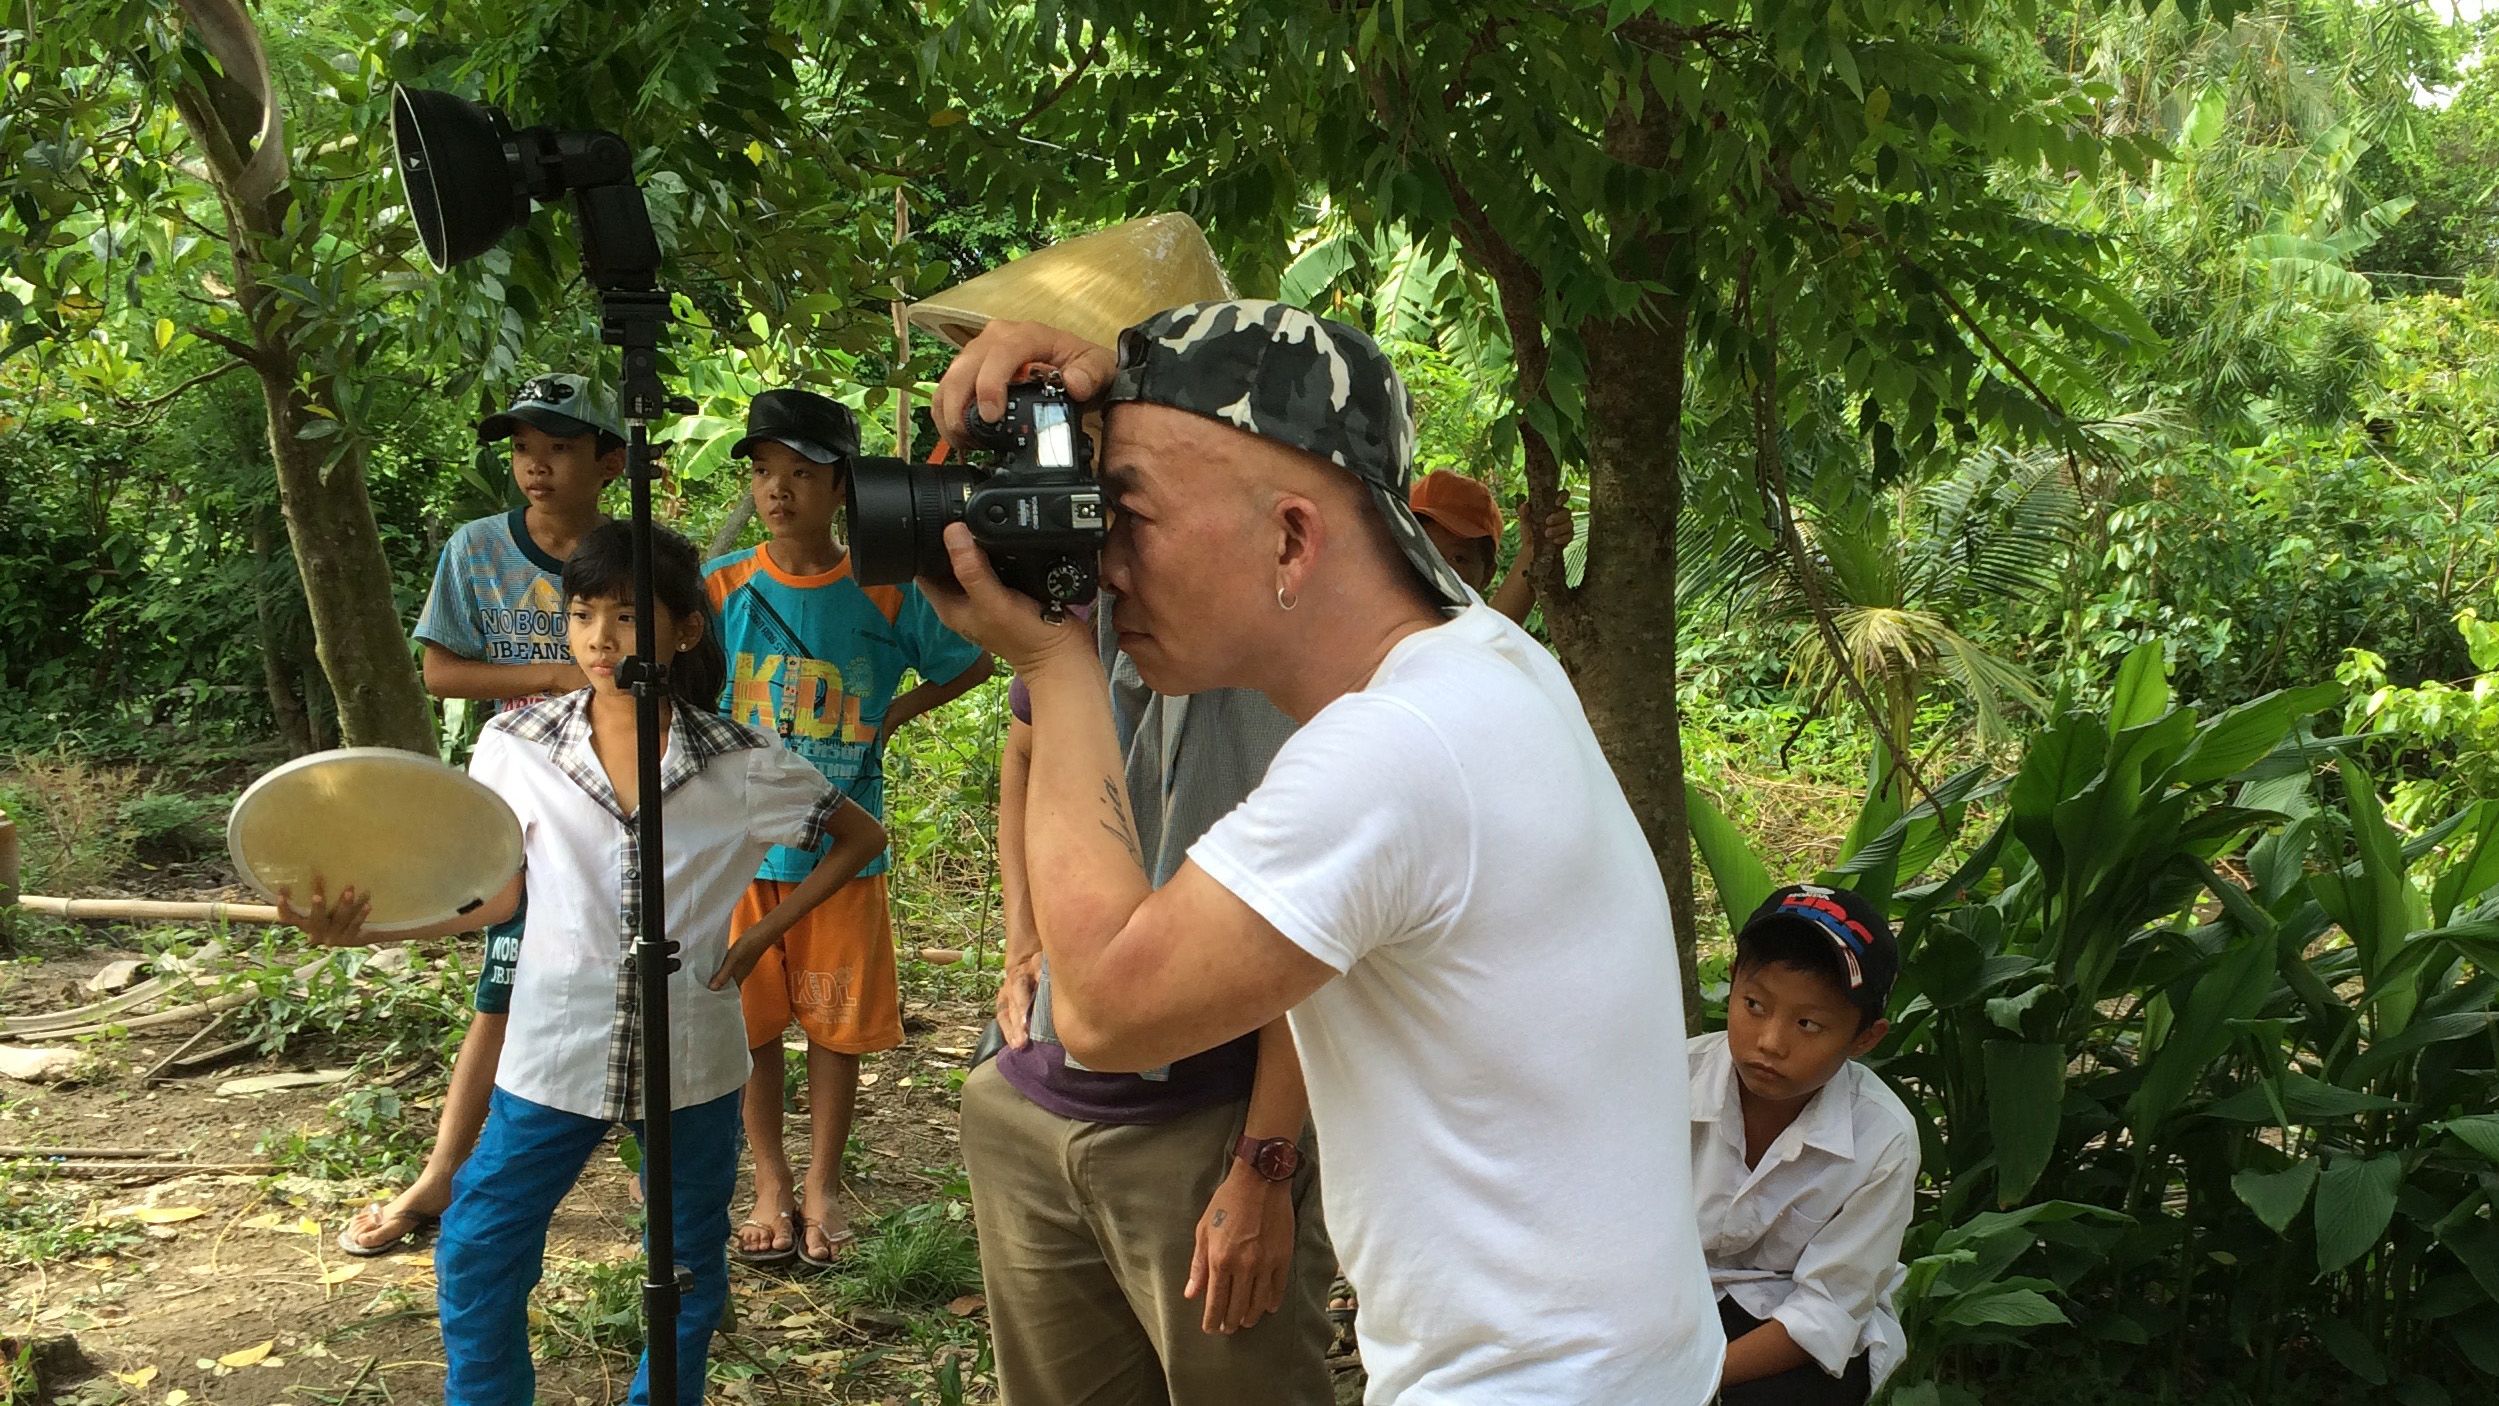  Pipo Nguyen-duy shooting photographs in Vietnam for his series "East of Eden." [Pipo Nguyen-duy]